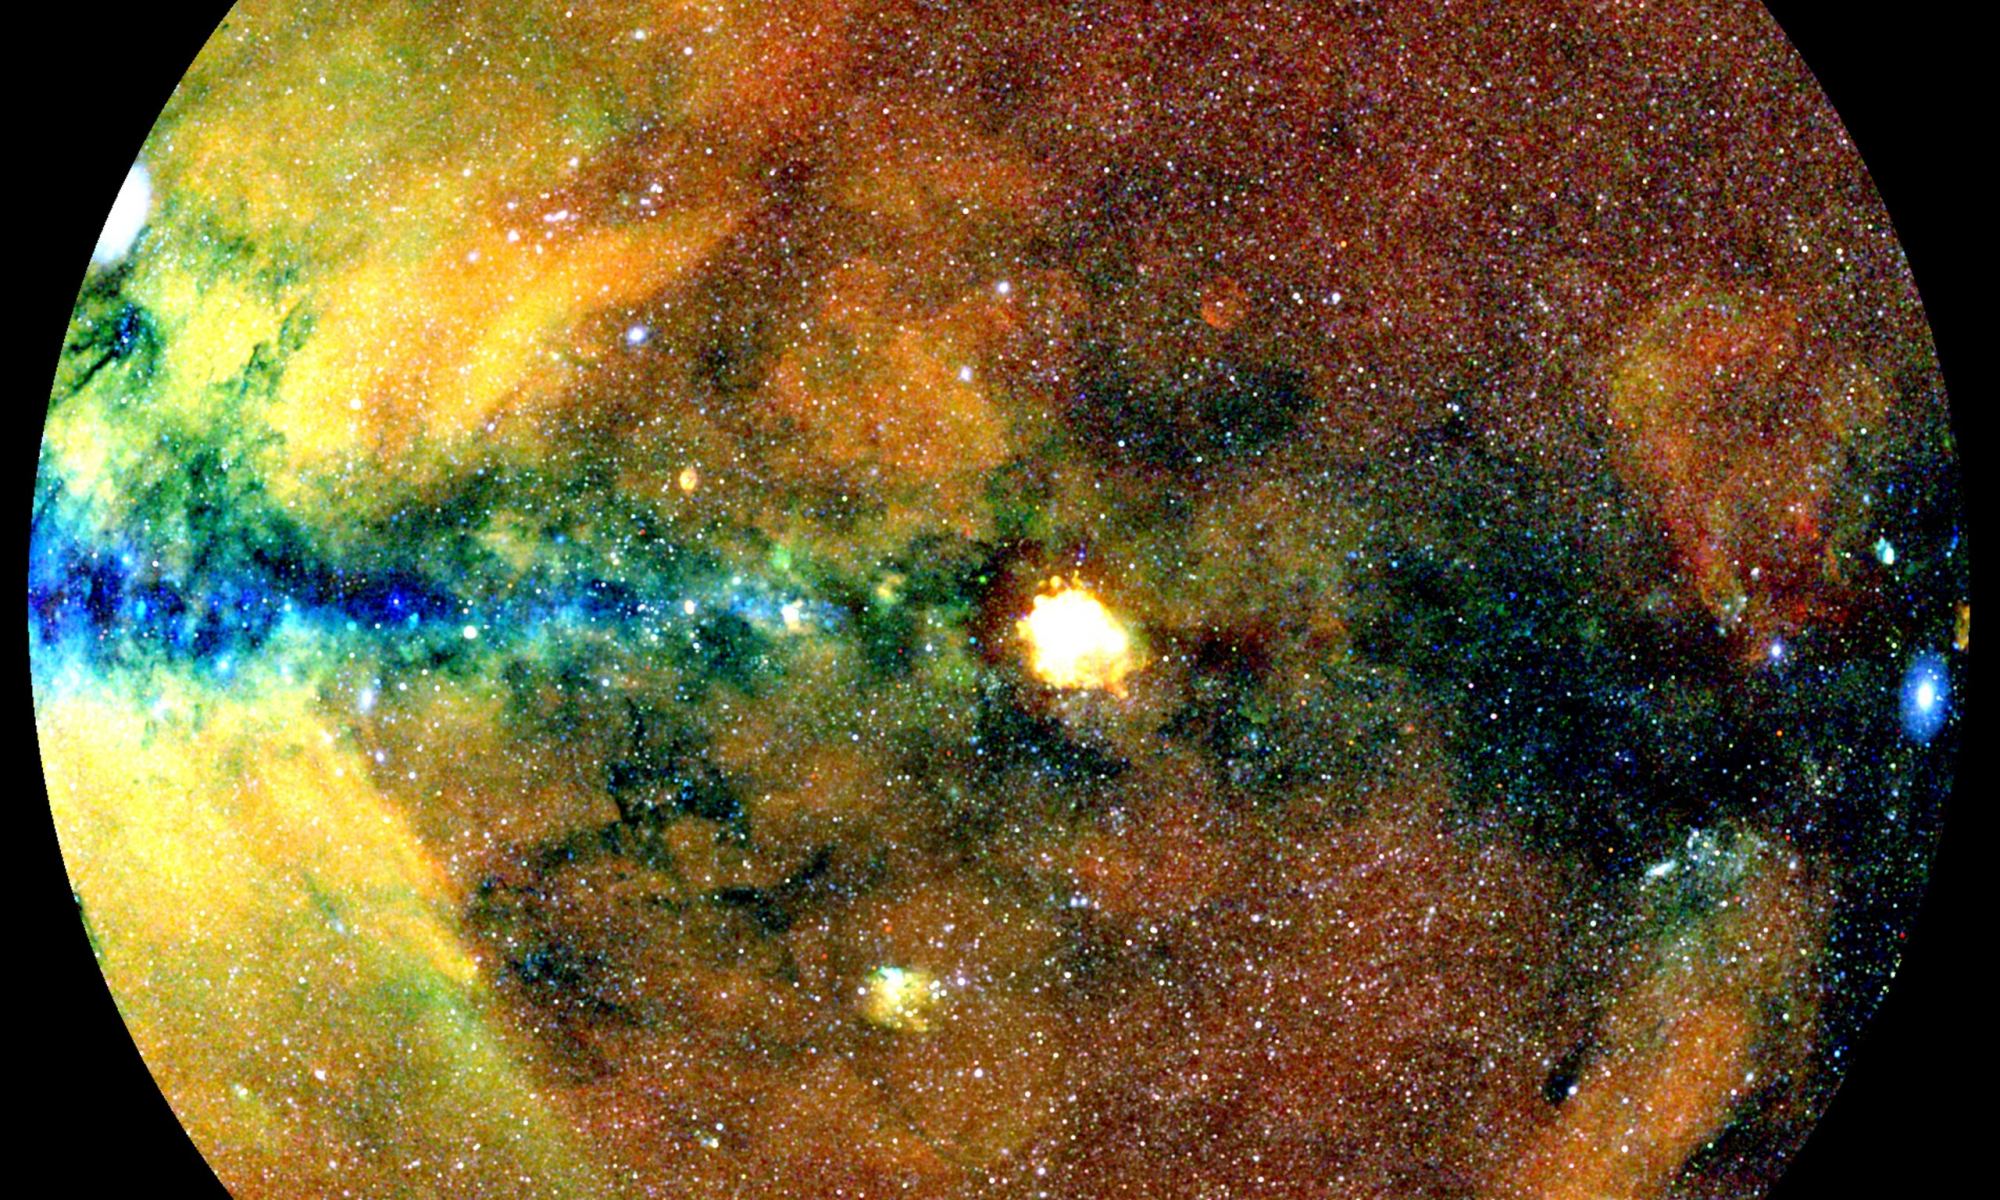 This image show half of the X-ray sky, projected onto a circle with the center of the Milky Way on the left and the galactic plane running horizontally. Photons have been colour-coded according to their energy (red for energies 0.3-0.6 keV, green for 0.6-1 keV, blue for 1-2.3 keV). Credit: MPE, J. Sanders for the eROSITA consortium